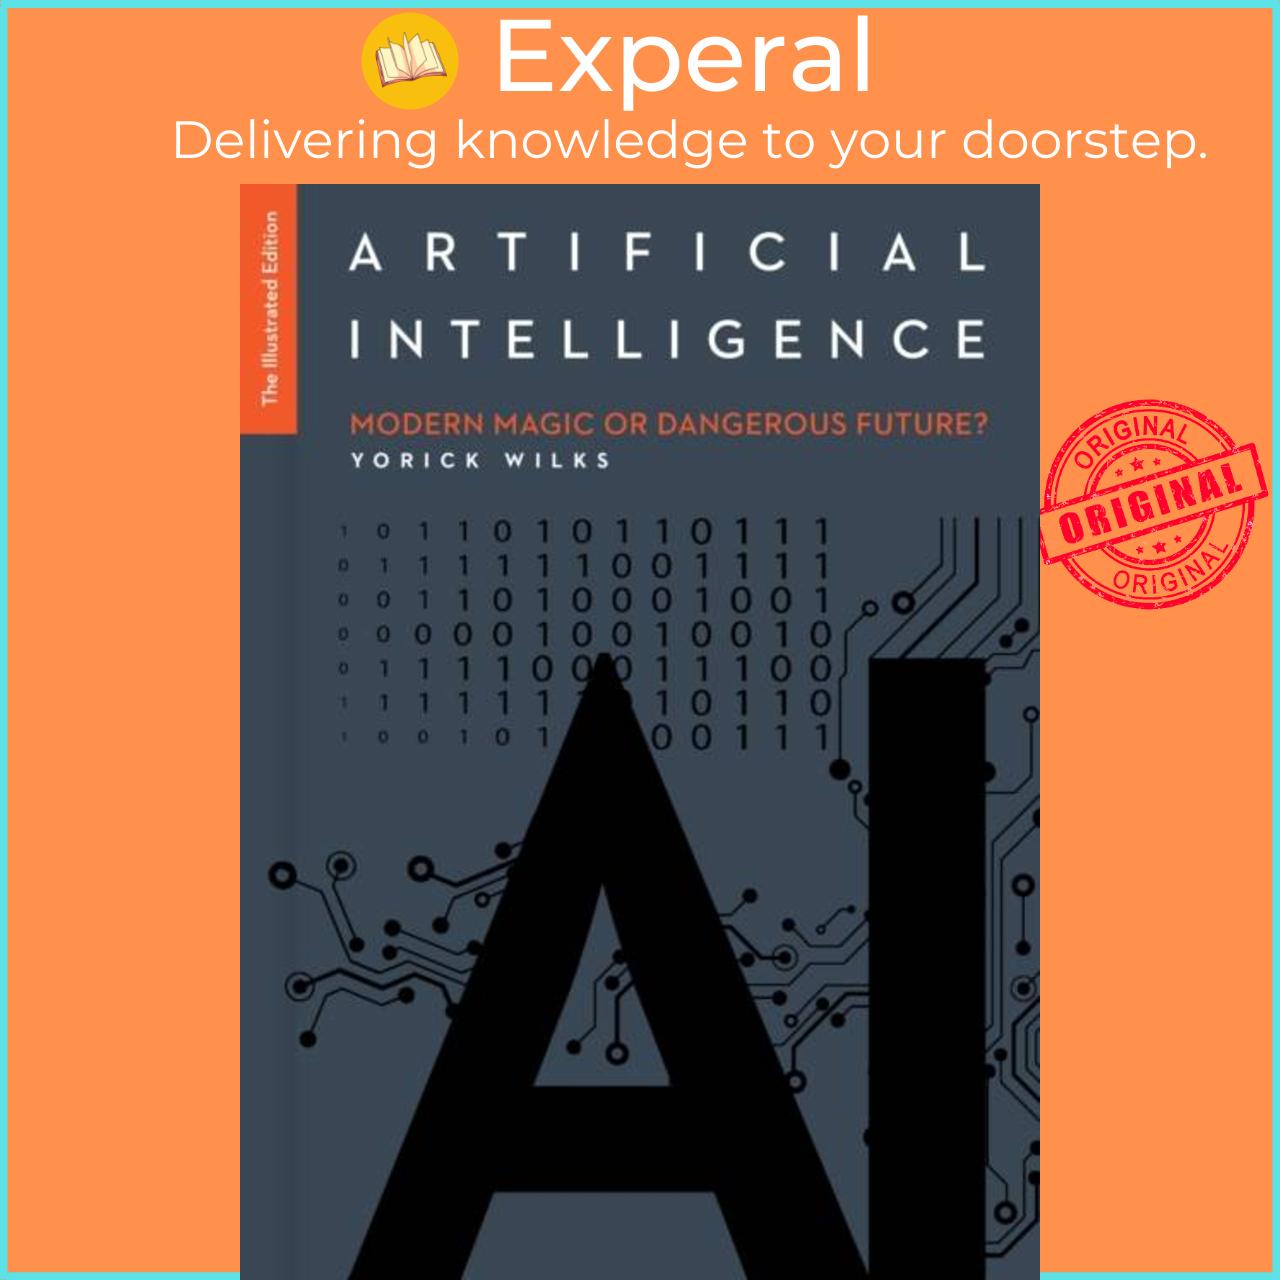 Sách - Artificial Intelligence: The Illustrated Edition by Yorick Wilks (UK edition, hardcover)